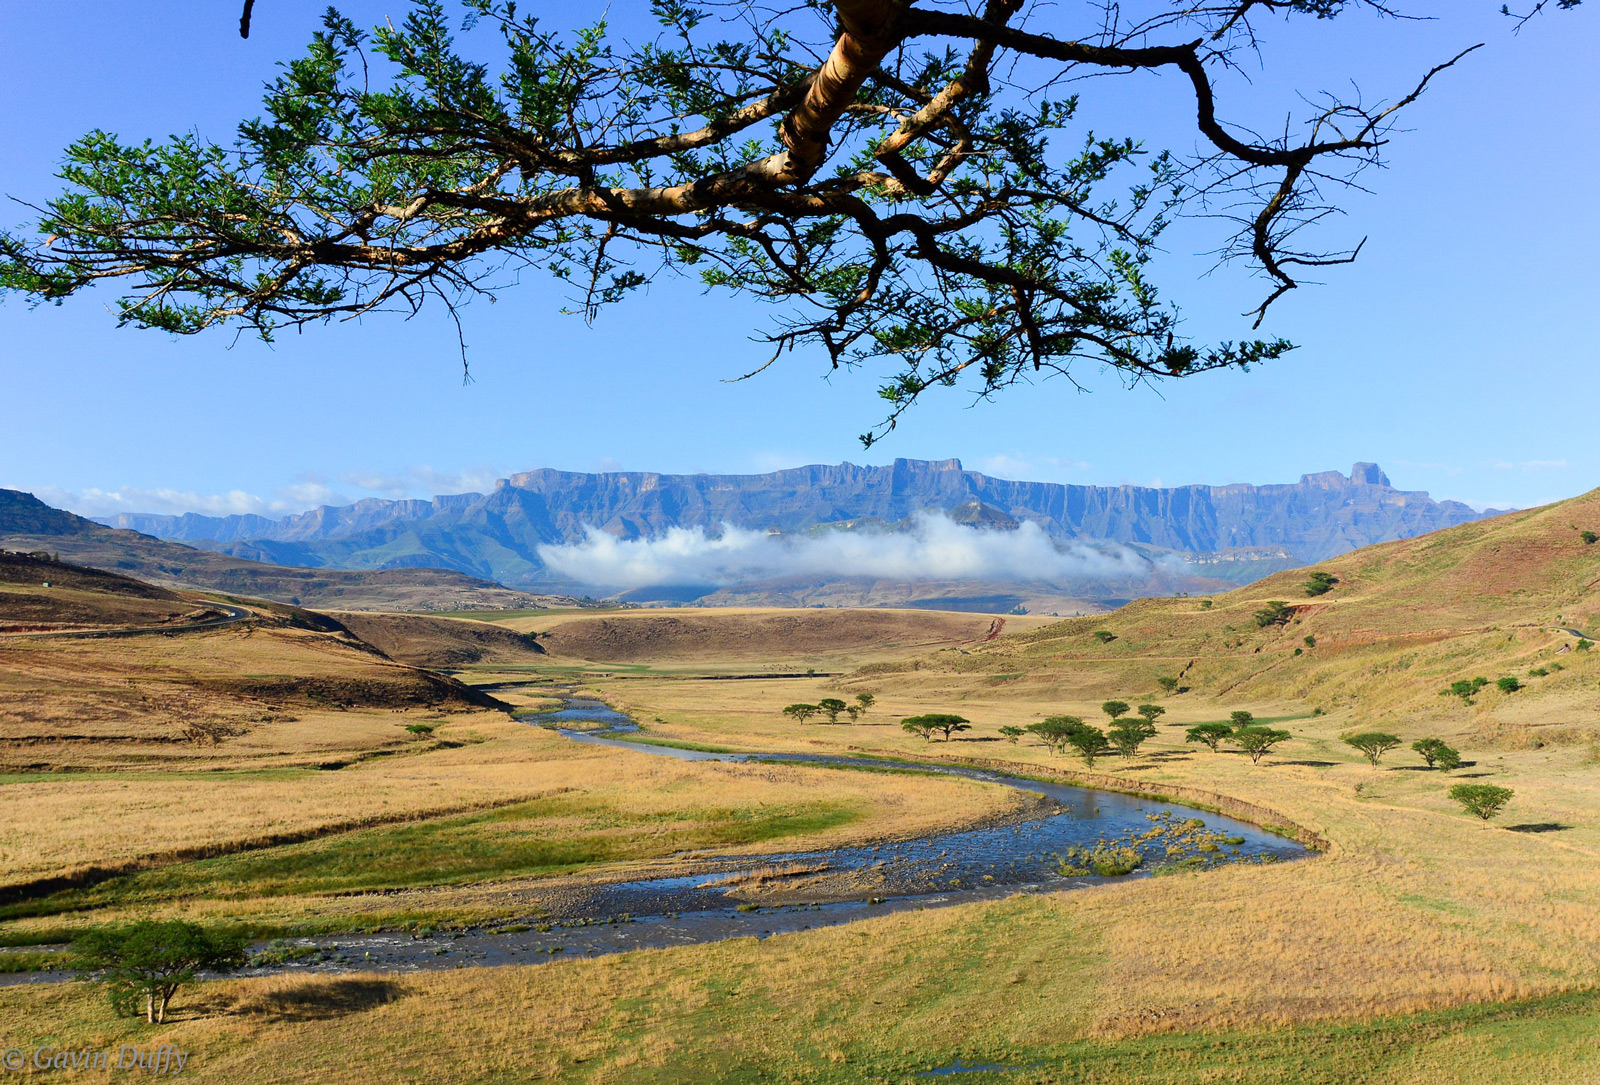 View of the Drakensburg Amphitheatre. Royal Natal National Park, South Africa © Gavin Duffy